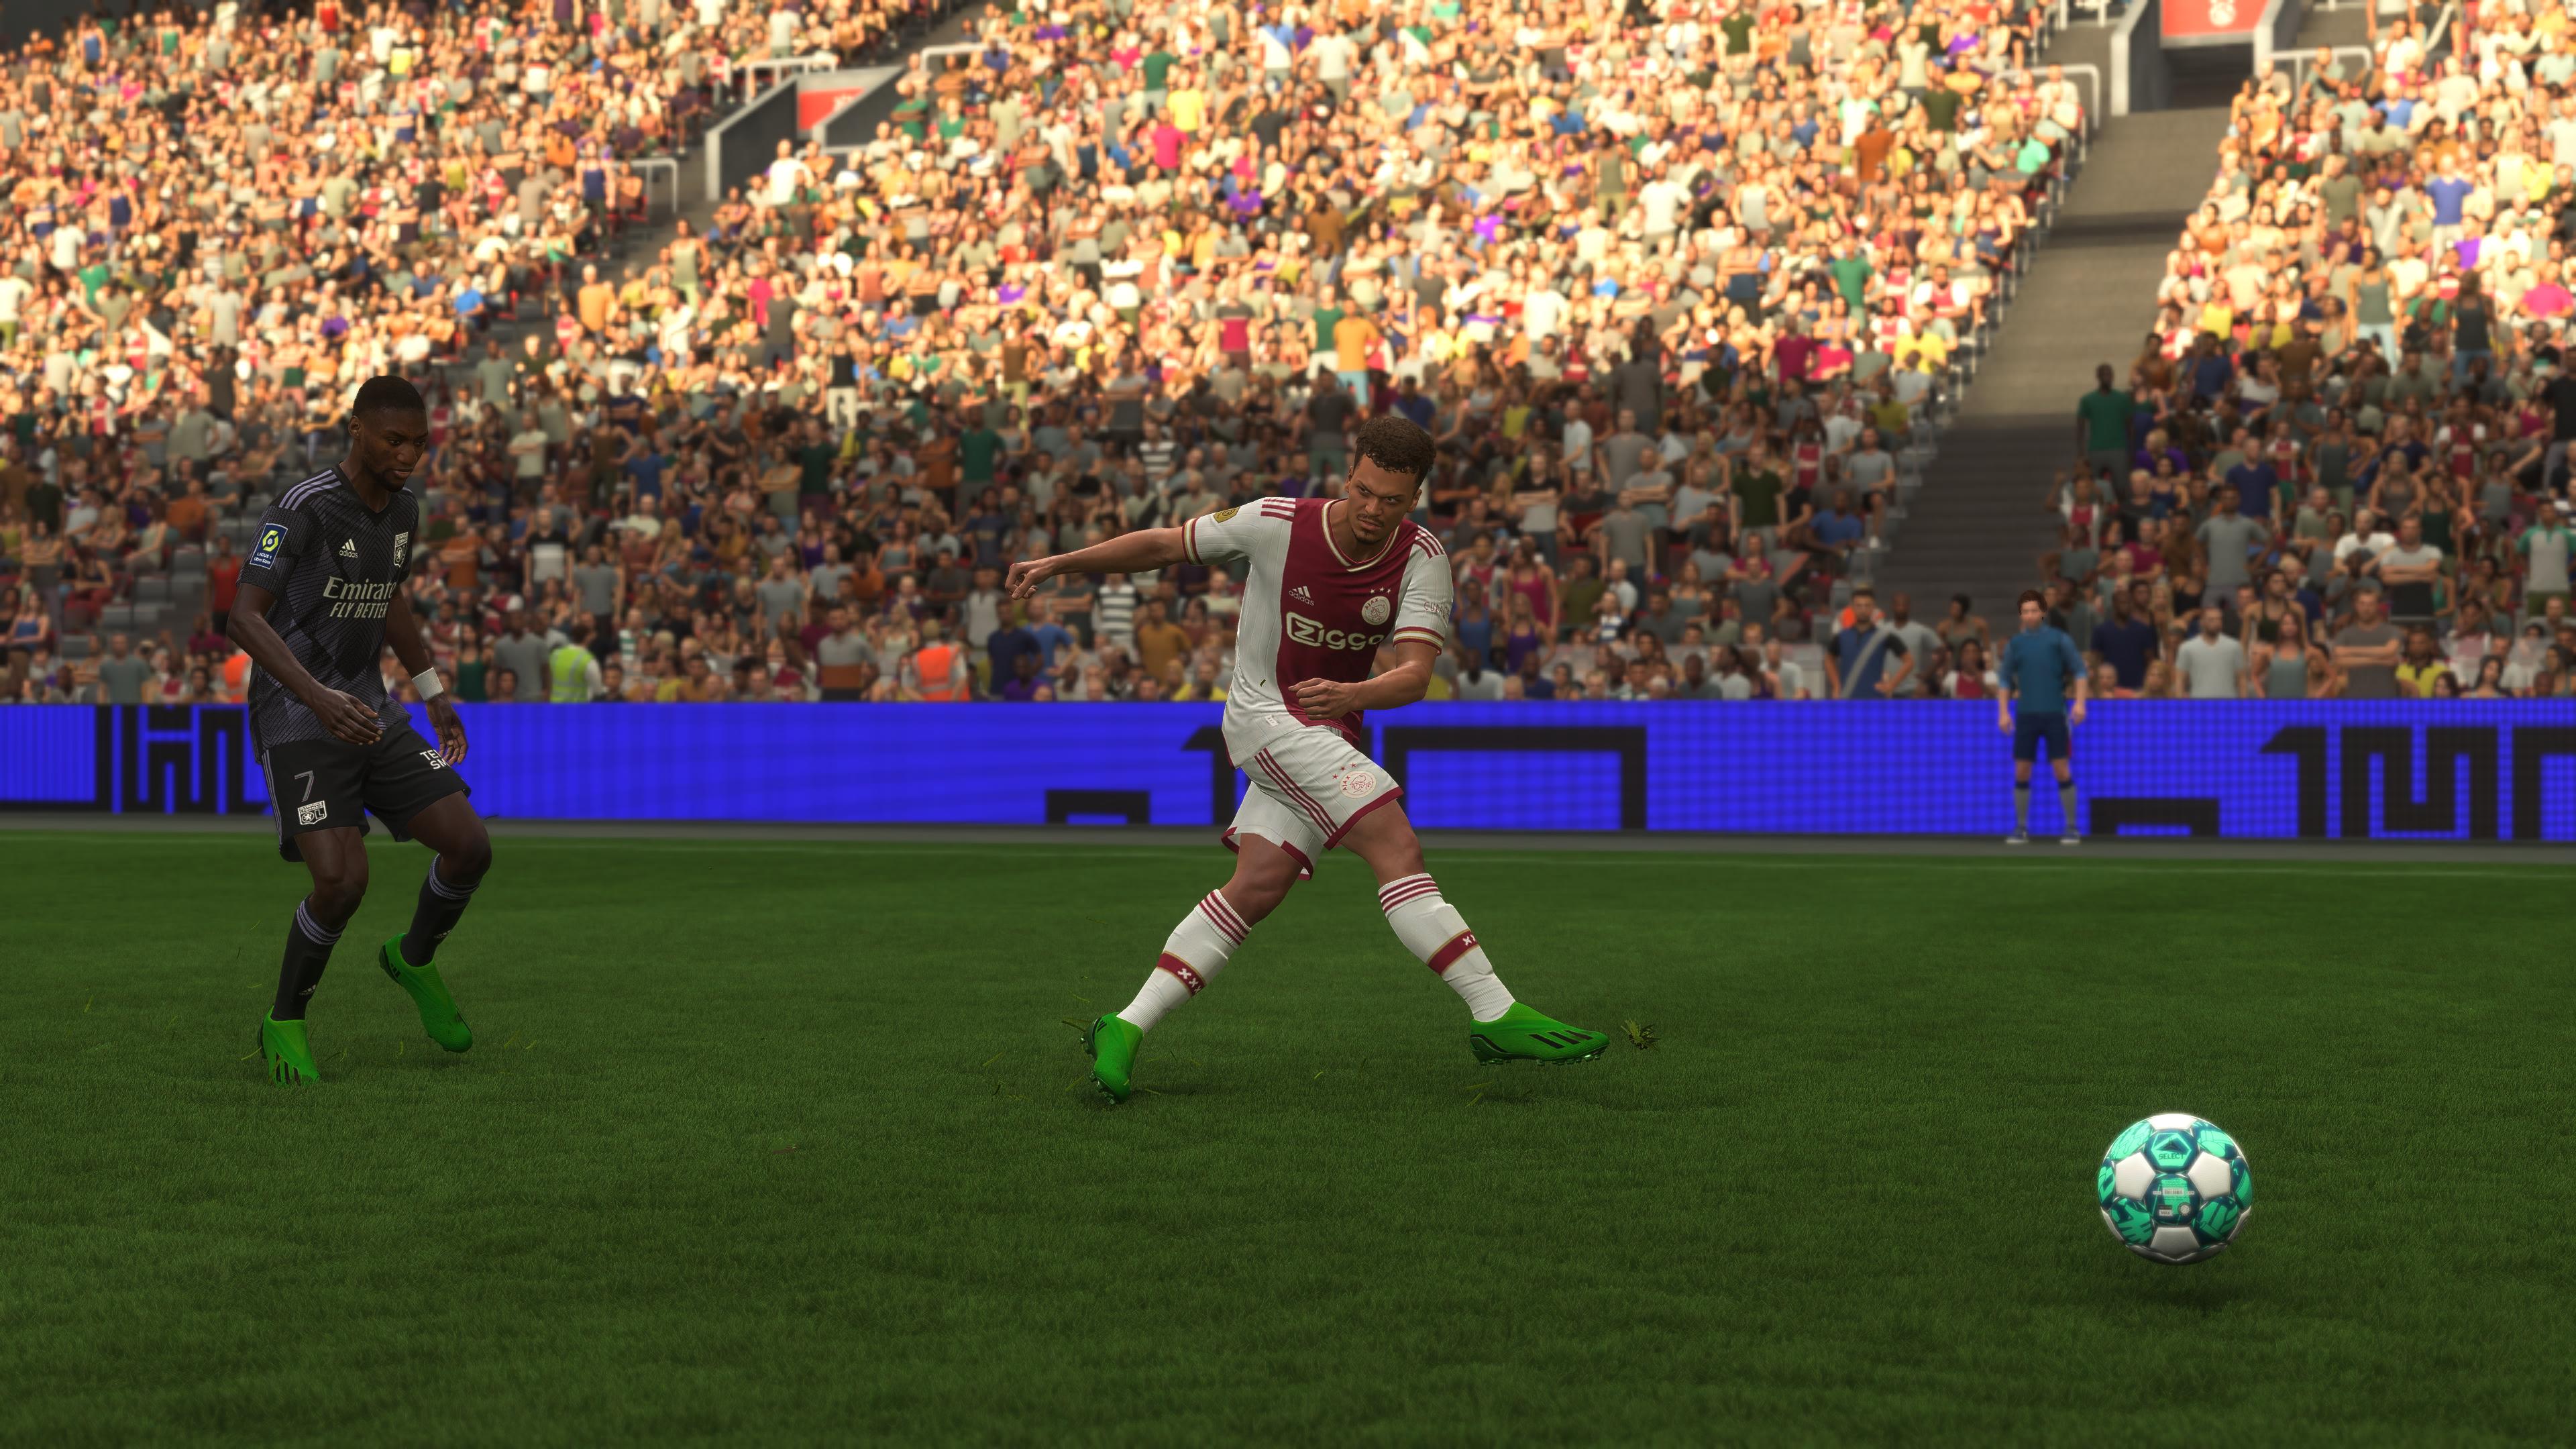 One of the best Ajax midfielders in FIFA 23 striking the ball back to the goalkeeper